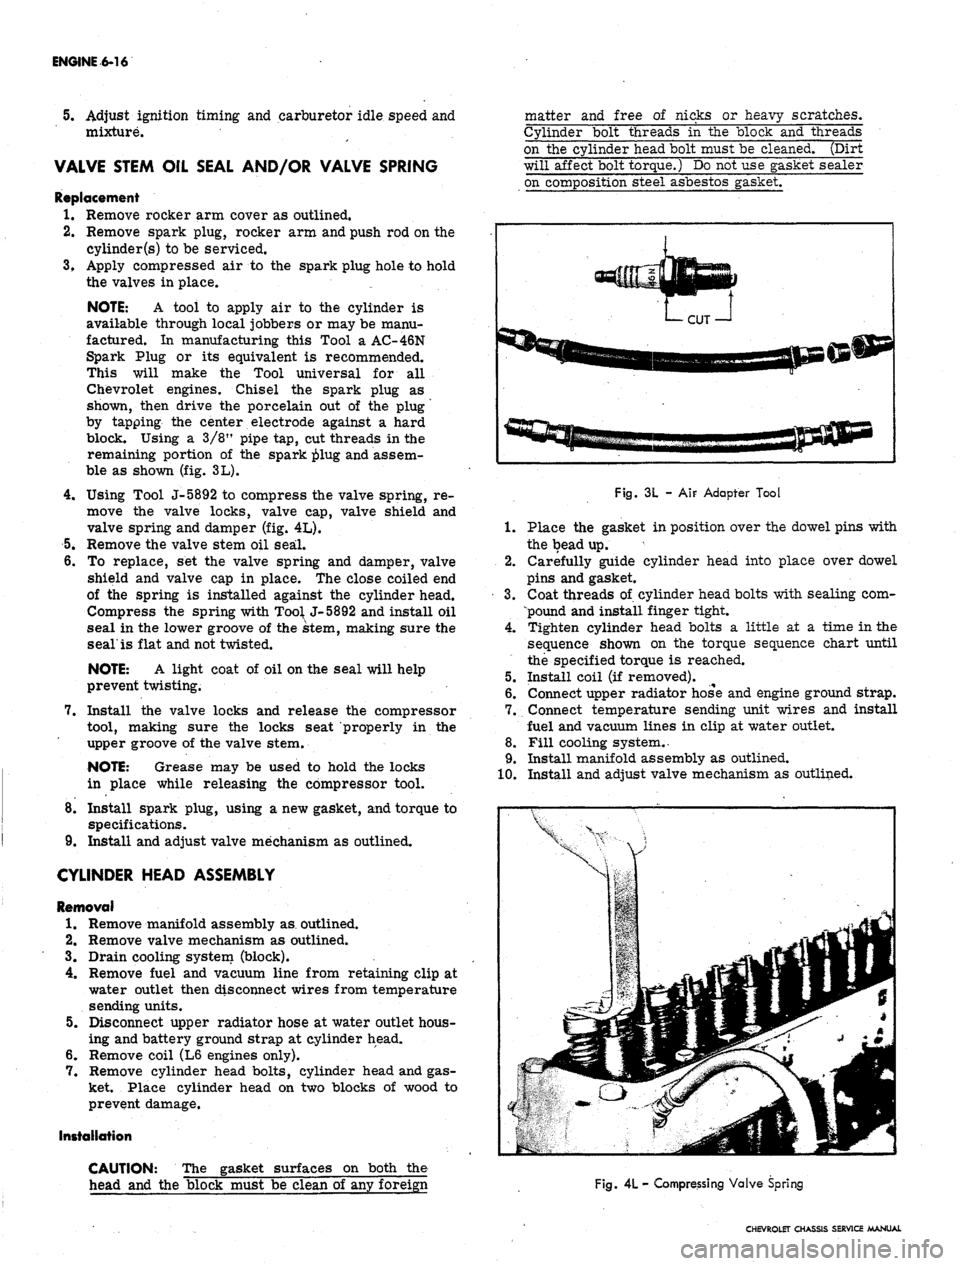 CHEVROLET CAMARO 1967 1.G Chassis Workshop Manual 
ENGINE 6-16

5.
 Adjust ignition timing and carburetor idle speed and

mixture.

VALVE STEM OIL SEAL AND/OR VALVE SPRING

Replacement

1.
 Remove rocker arm cover as outlined.

2.
 Remove spark plug,